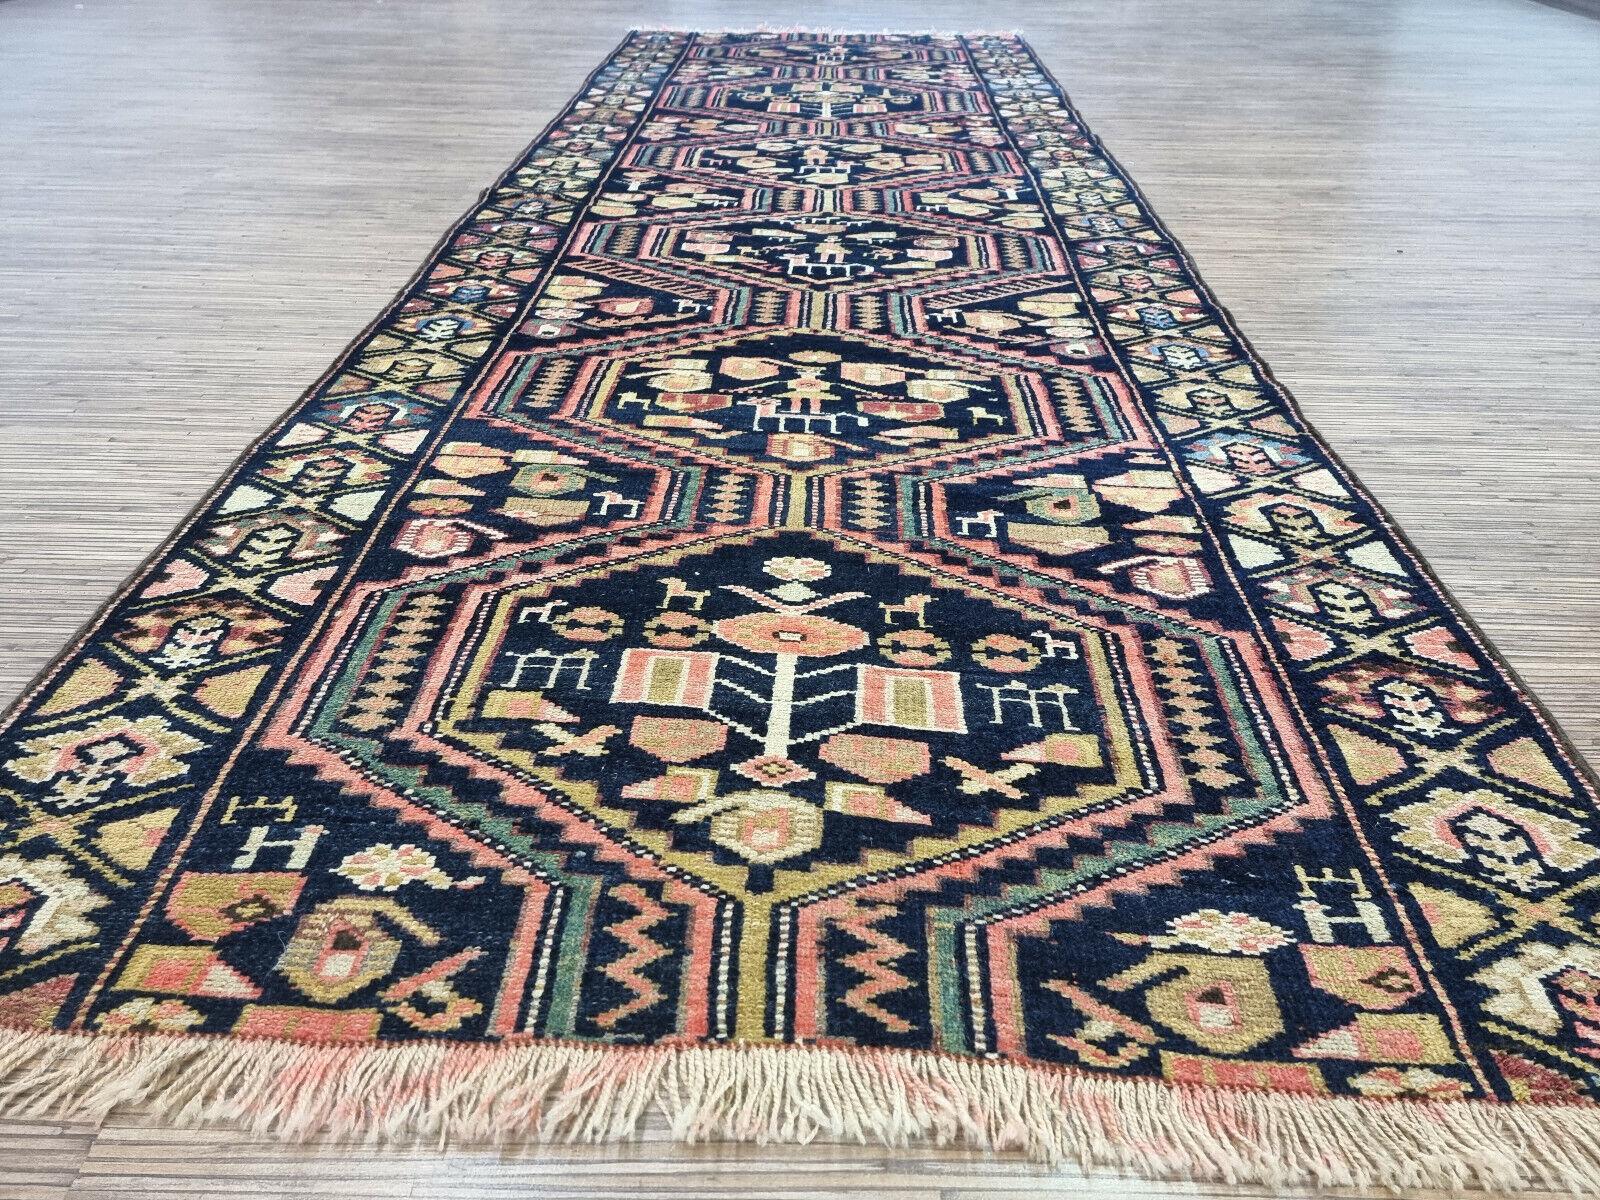 Hand-Knotted Handmade Antique Persian Style Luri Runner Rug 3.2' x 9.1', 1920s - 1D103